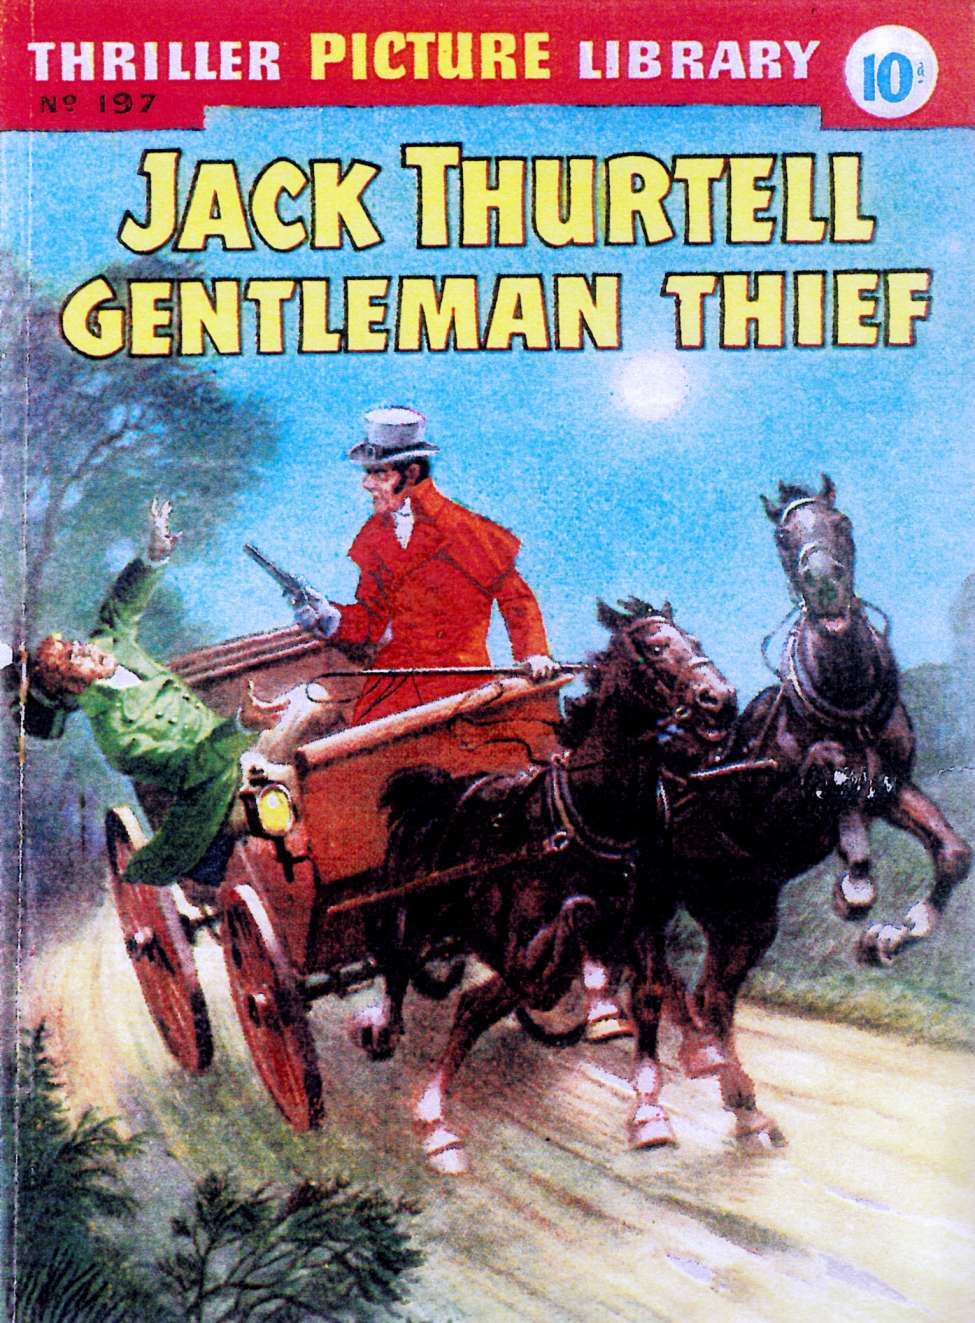 Book Cover For Thriller Picture Library 197 - Jack Thurtell Gentleman Thief